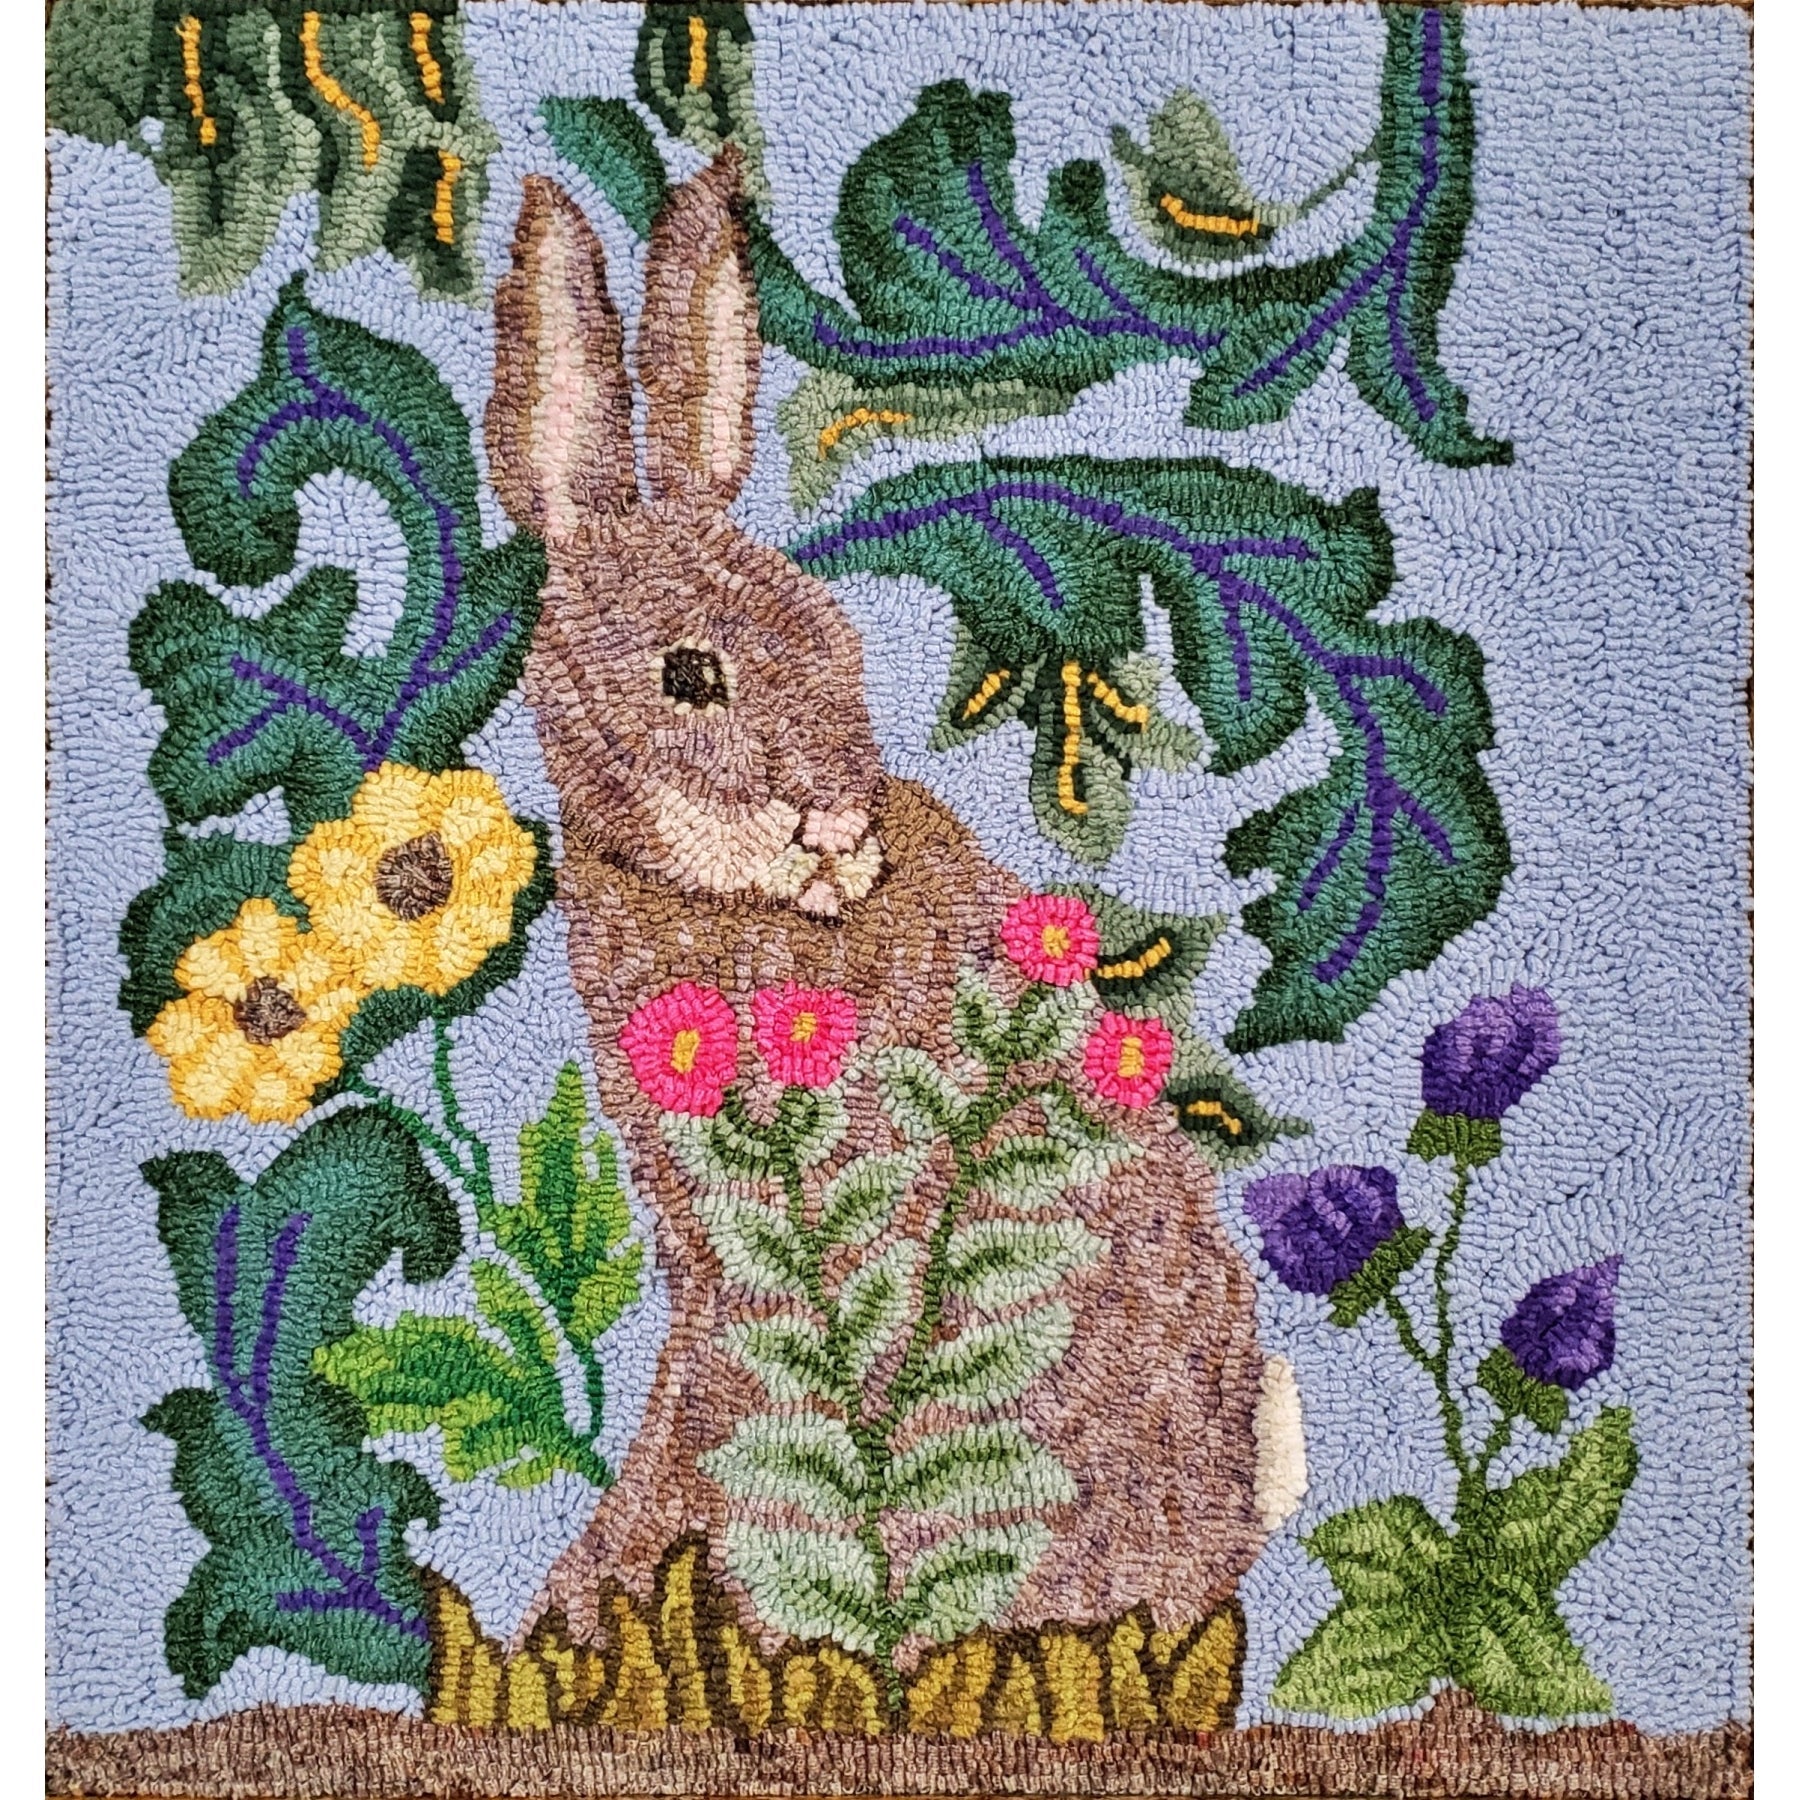 Morris Bunny, rug hooked by Donna Martin